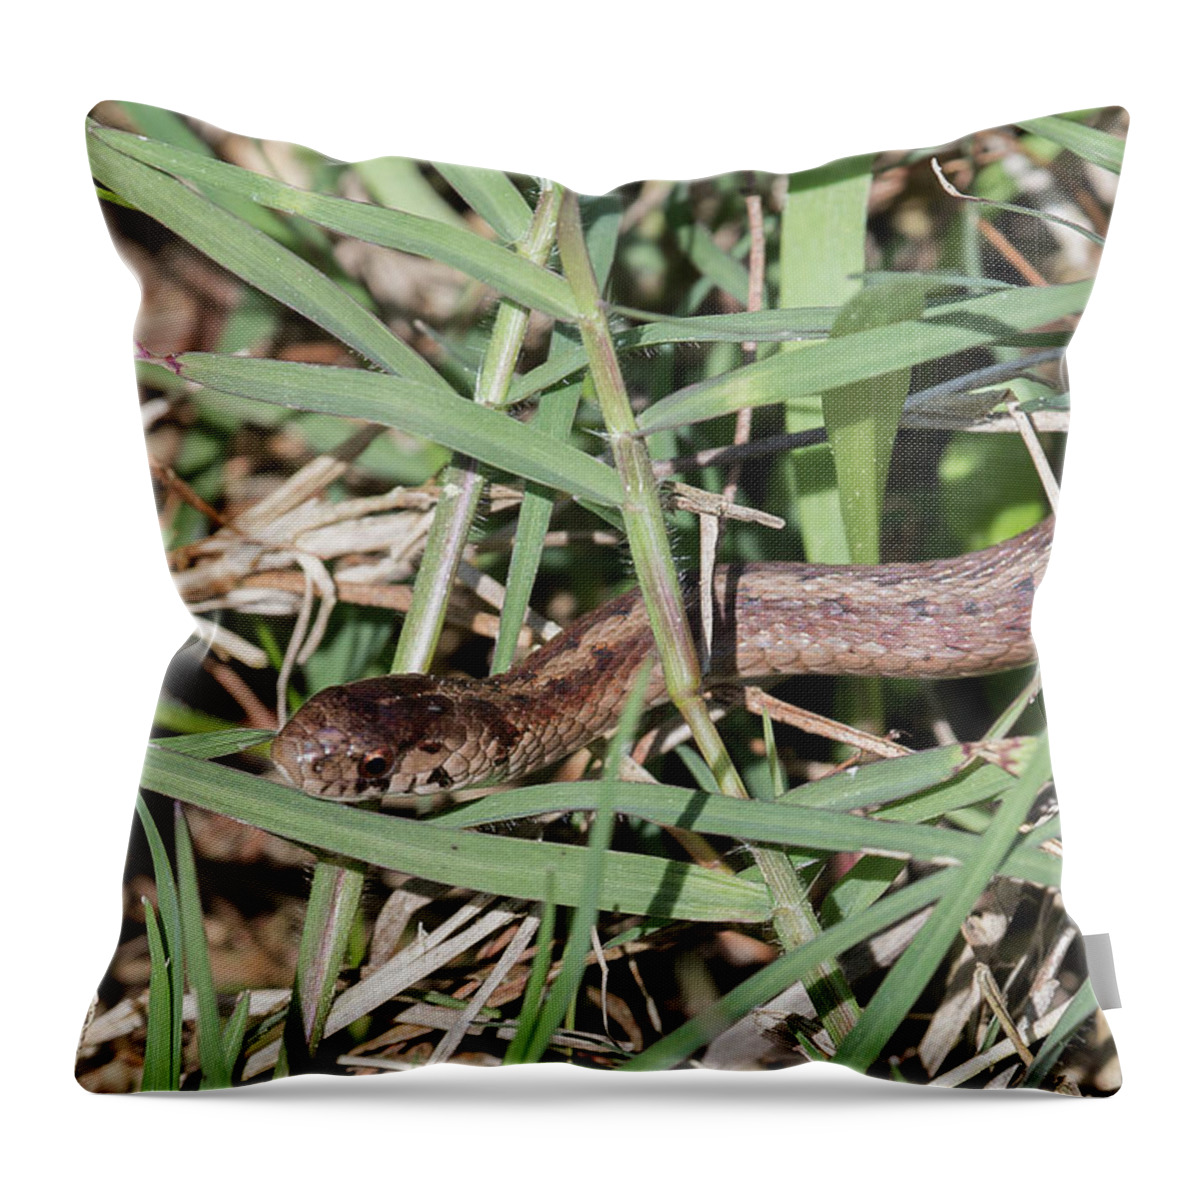 Ronnie Maum Throw Pillow featuring the photograph Brown Snake by Ronnie Maum